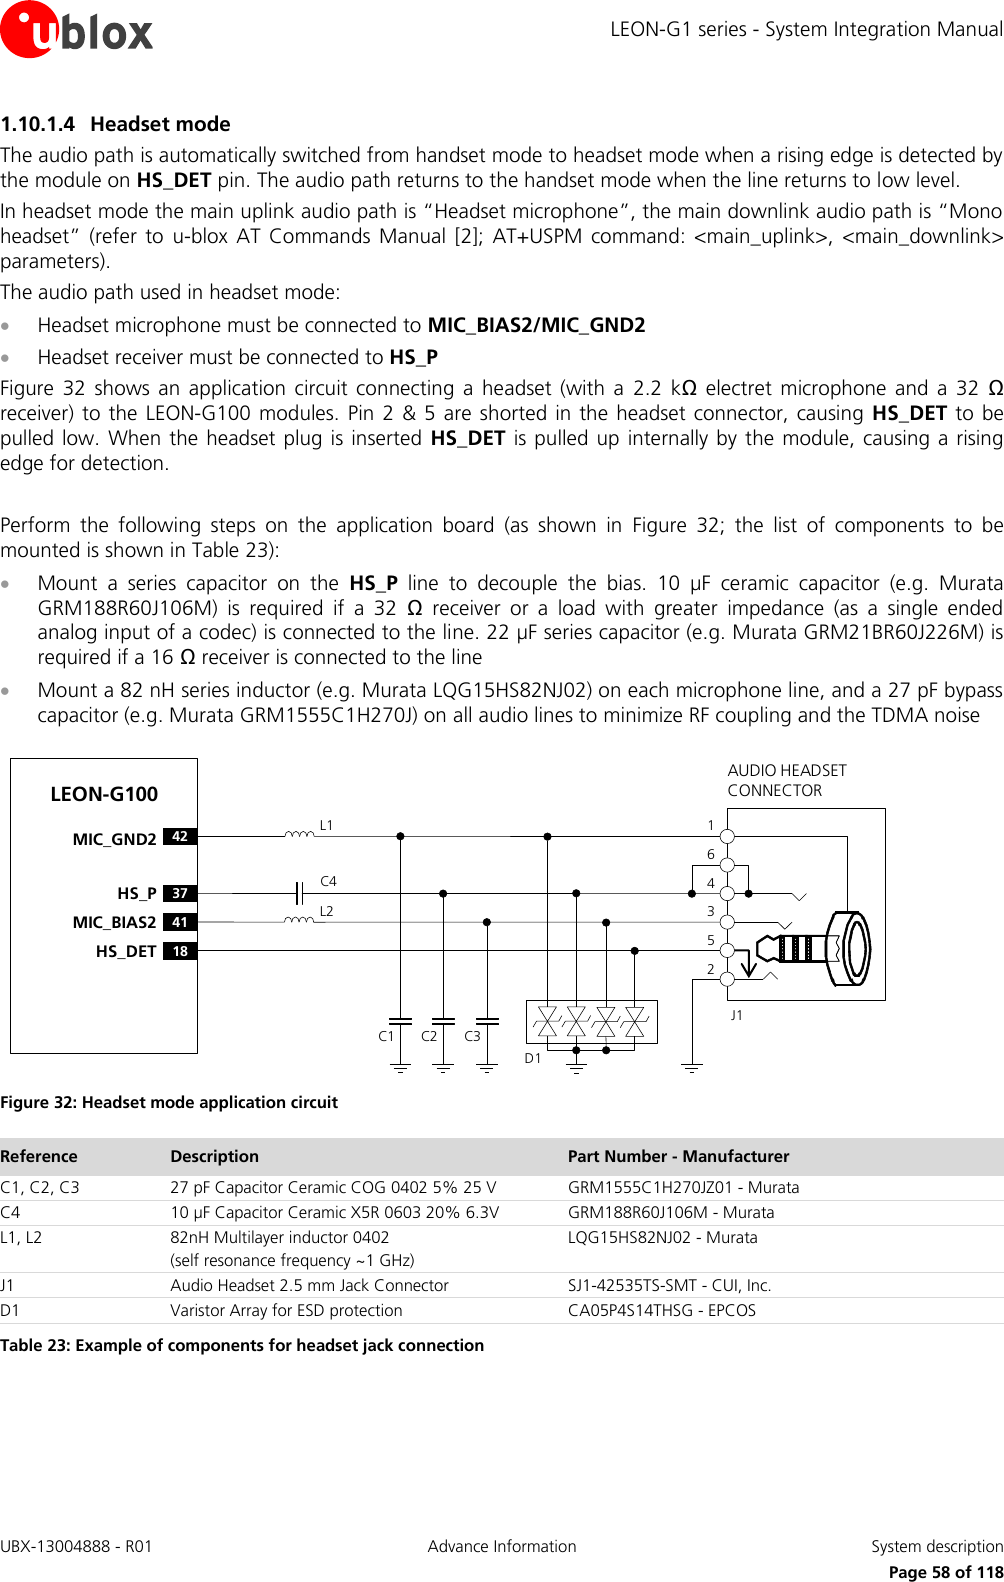 LEON-G1 series - System Integration Manual UBX-13004888 - R01  Advance Information  System description      Page 58 of 118 1.10.1.4 Headset mode The audio path is automatically switched from handset mode to headset mode when a rising edge is detected by the module on HS_DET pin. The audio path returns to the handset mode when the line returns to low level. In headset mode the main uplink audio path is “Headset microphone”, the main downlink audio path is “Mono headset”  (refer to  u-blox  AT  Commands  Manual  [2];  AT+USPM  command:  &lt;main_uplink&gt;,  &lt;main_downlink&gt; parameters). The audio path used in headset mode:  Headset microphone must be connected to MIC_BIAS2/MIC_GND2  Headset receiver must be connected to HS_P Figure  32  shows an  application  circuit  connecting  a  headset  (with  a  2.2  kΩ  electret  microphone and a  32  Ω receiver) to the LEON-G100  modules. Pin 2  &amp; 5 are shorted  in the  headset connector, causing  HS_DET to be pulled low. When the headset plug is inserted  HS_DET is pulled up  internally by the module, causing a  rising edge for detection.  Perform  the  following  steps  on  the  application  board  (as  shown  in  Figure  32;  the  list  of  components  to  be mounted is shown in Table 23):  Mount  a  series  capacitor  on  the  HS_P  line  to  decouple  the  bias.  10  µF  ceramic  capacitor  (e.g.  Murata GRM188R60J106M)  is  required  if  a  32  Ω  receiver  or  a  load  with  greater  impedance  (as  a  single  ended analog input of a codec) is connected to the line. 22 µF series capacitor (e.g. Murata GRM21BR60J226M) is required if a 16 Ω receiver is connected to the line  Mount a 82 nH series inductor (e.g. Murata LQG15HS82NJ02) on each microphone line, and a 27 pF bypass capacitor (e.g. Murata GRM1555C1H270J) on all audio lines to minimize RF coupling and the TDMA noise LEON-G100C4AUDIO HEADSET CONNECTORC1 C2 C3J1253461L1L218HS_DET37HS_P42MIC_GND241MIC_BIAS2D1 Figure 32: Headset mode application circuit Reference Description Part Number - Manufacturer C1, C2, C3 27 pF Capacitor Ceramic COG 0402 5% 25 V  GRM1555C1H270JZ01 - Murata C4 10 µF Capacitor Ceramic X5R 0603 20% 6.3V GRM188R60J106M - Murata L1, L2 82nH Multilayer inductor 0402 (self resonance frequency ~1 GHz) LQG15HS82NJ02 - Murata J1 Audio Headset 2.5 mm Jack Connector SJ1-42535TS-SMT - CUI, Inc. D1 Varistor Array for ESD protection CA05P4S14THSG - EPCOS Table 23: Example of components for headset jack connection  